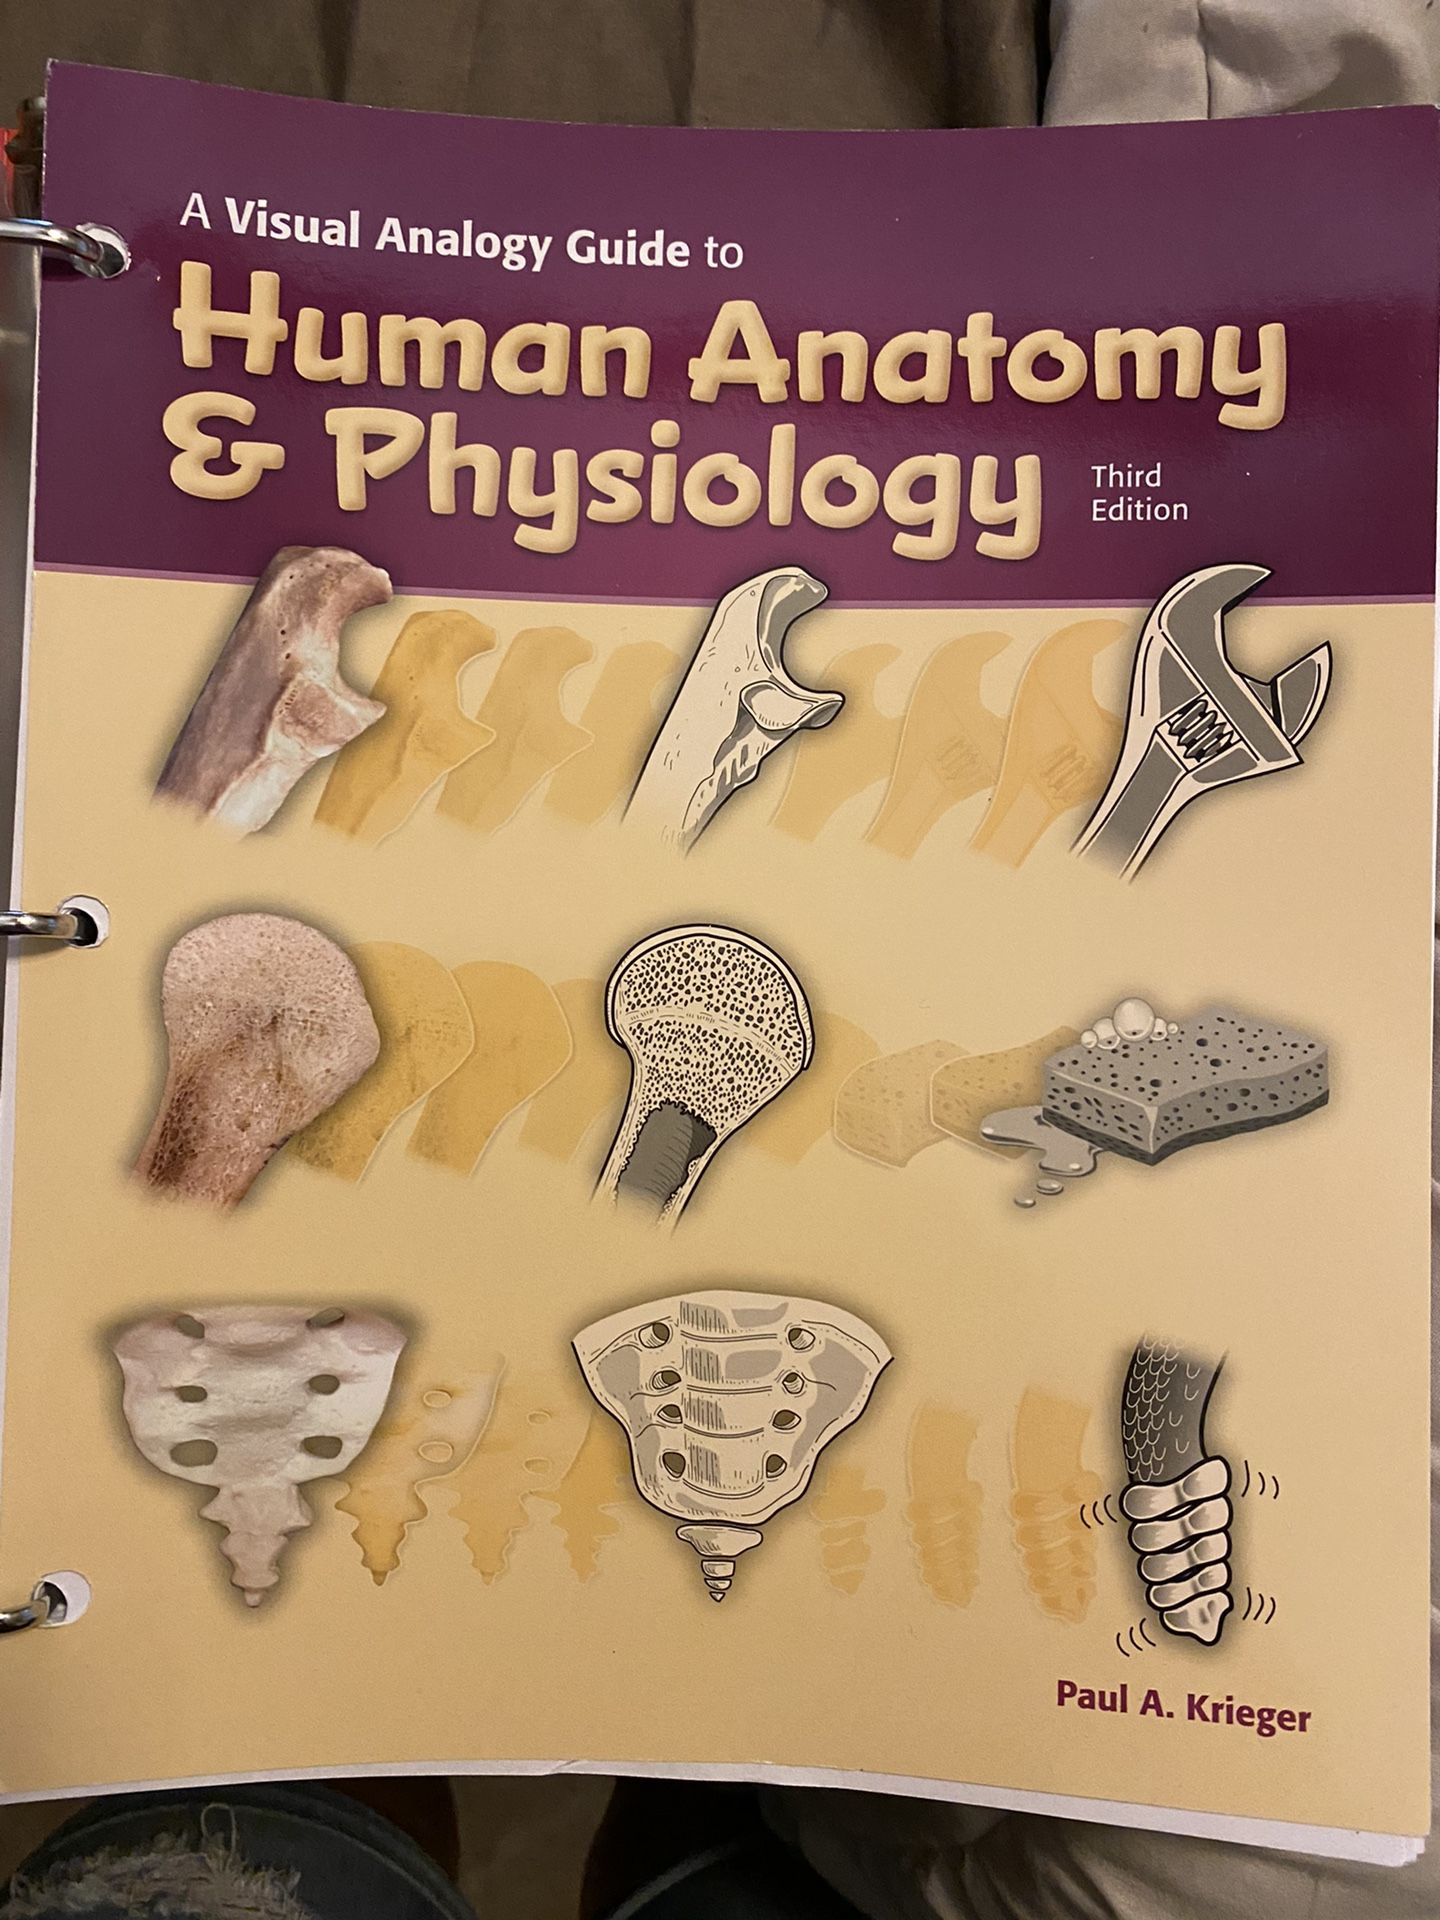 Anatomy and Physiology book